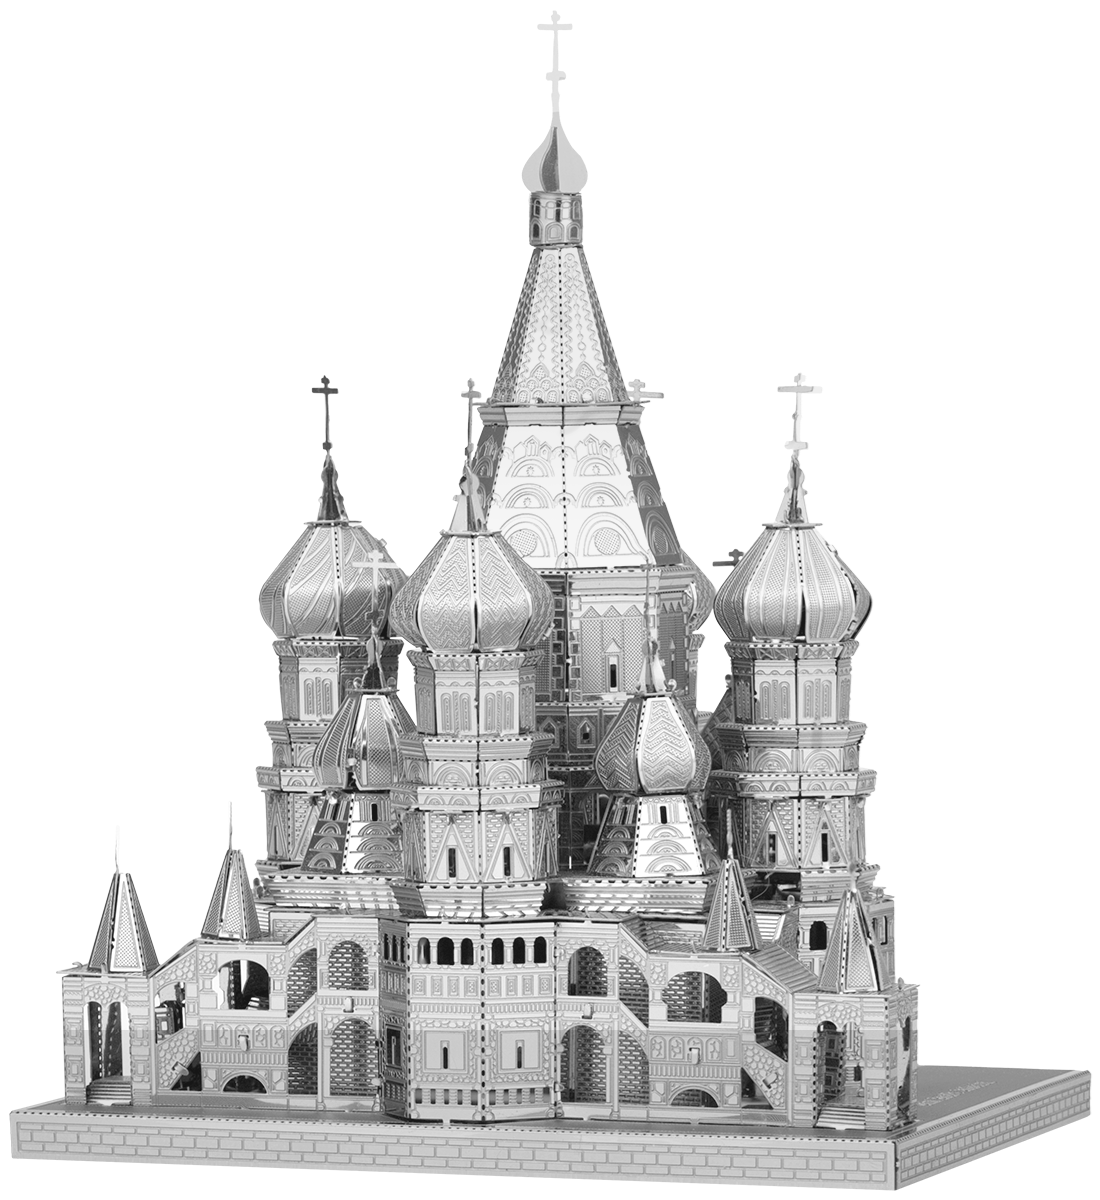 Iconix 3D Metal Model Kits Saint Basil's Cathedral for sale online 